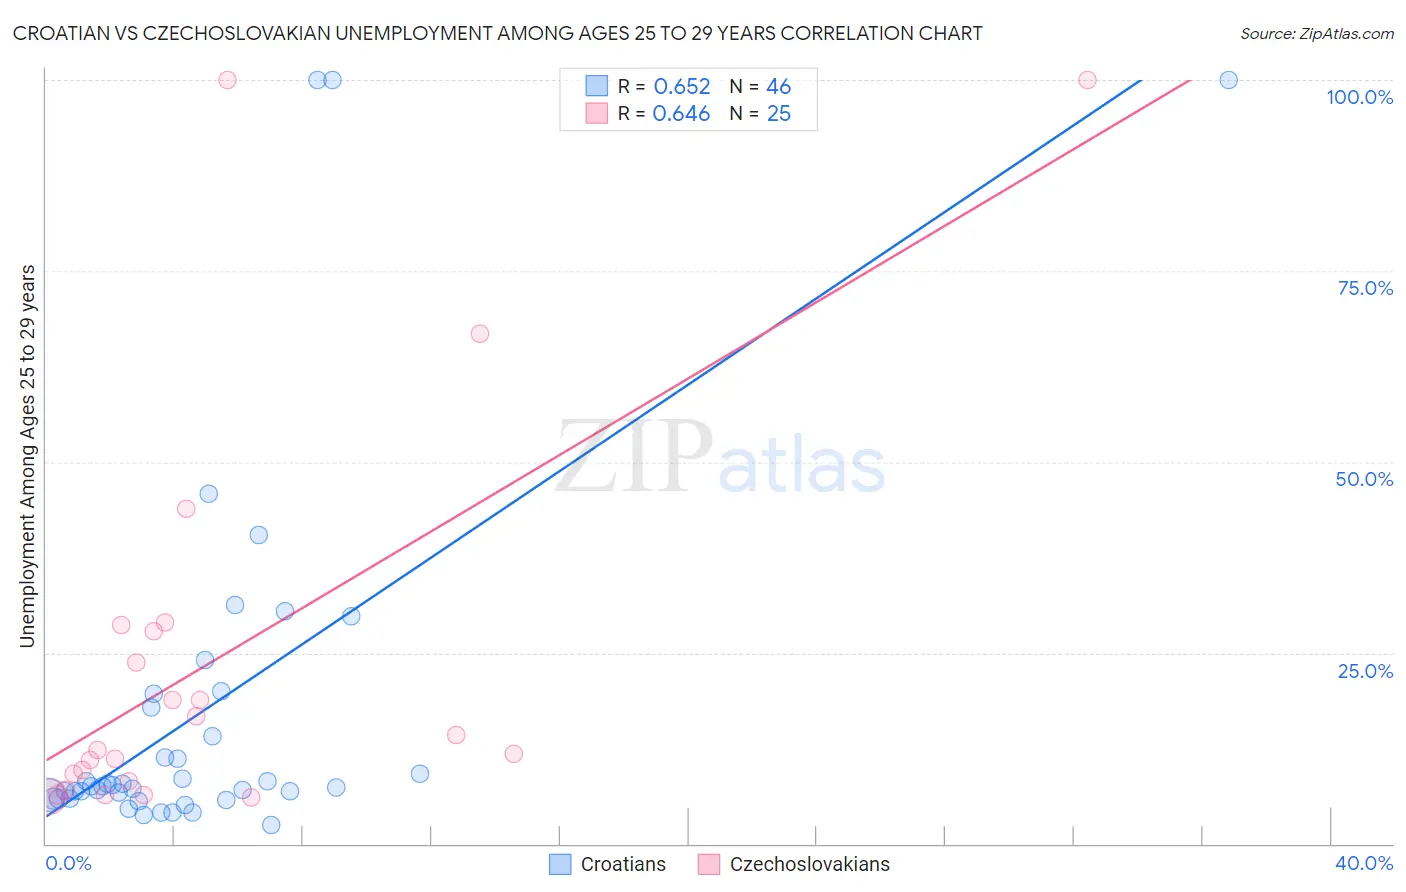 Croatian vs Czechoslovakian Unemployment Among Ages 25 to 29 years